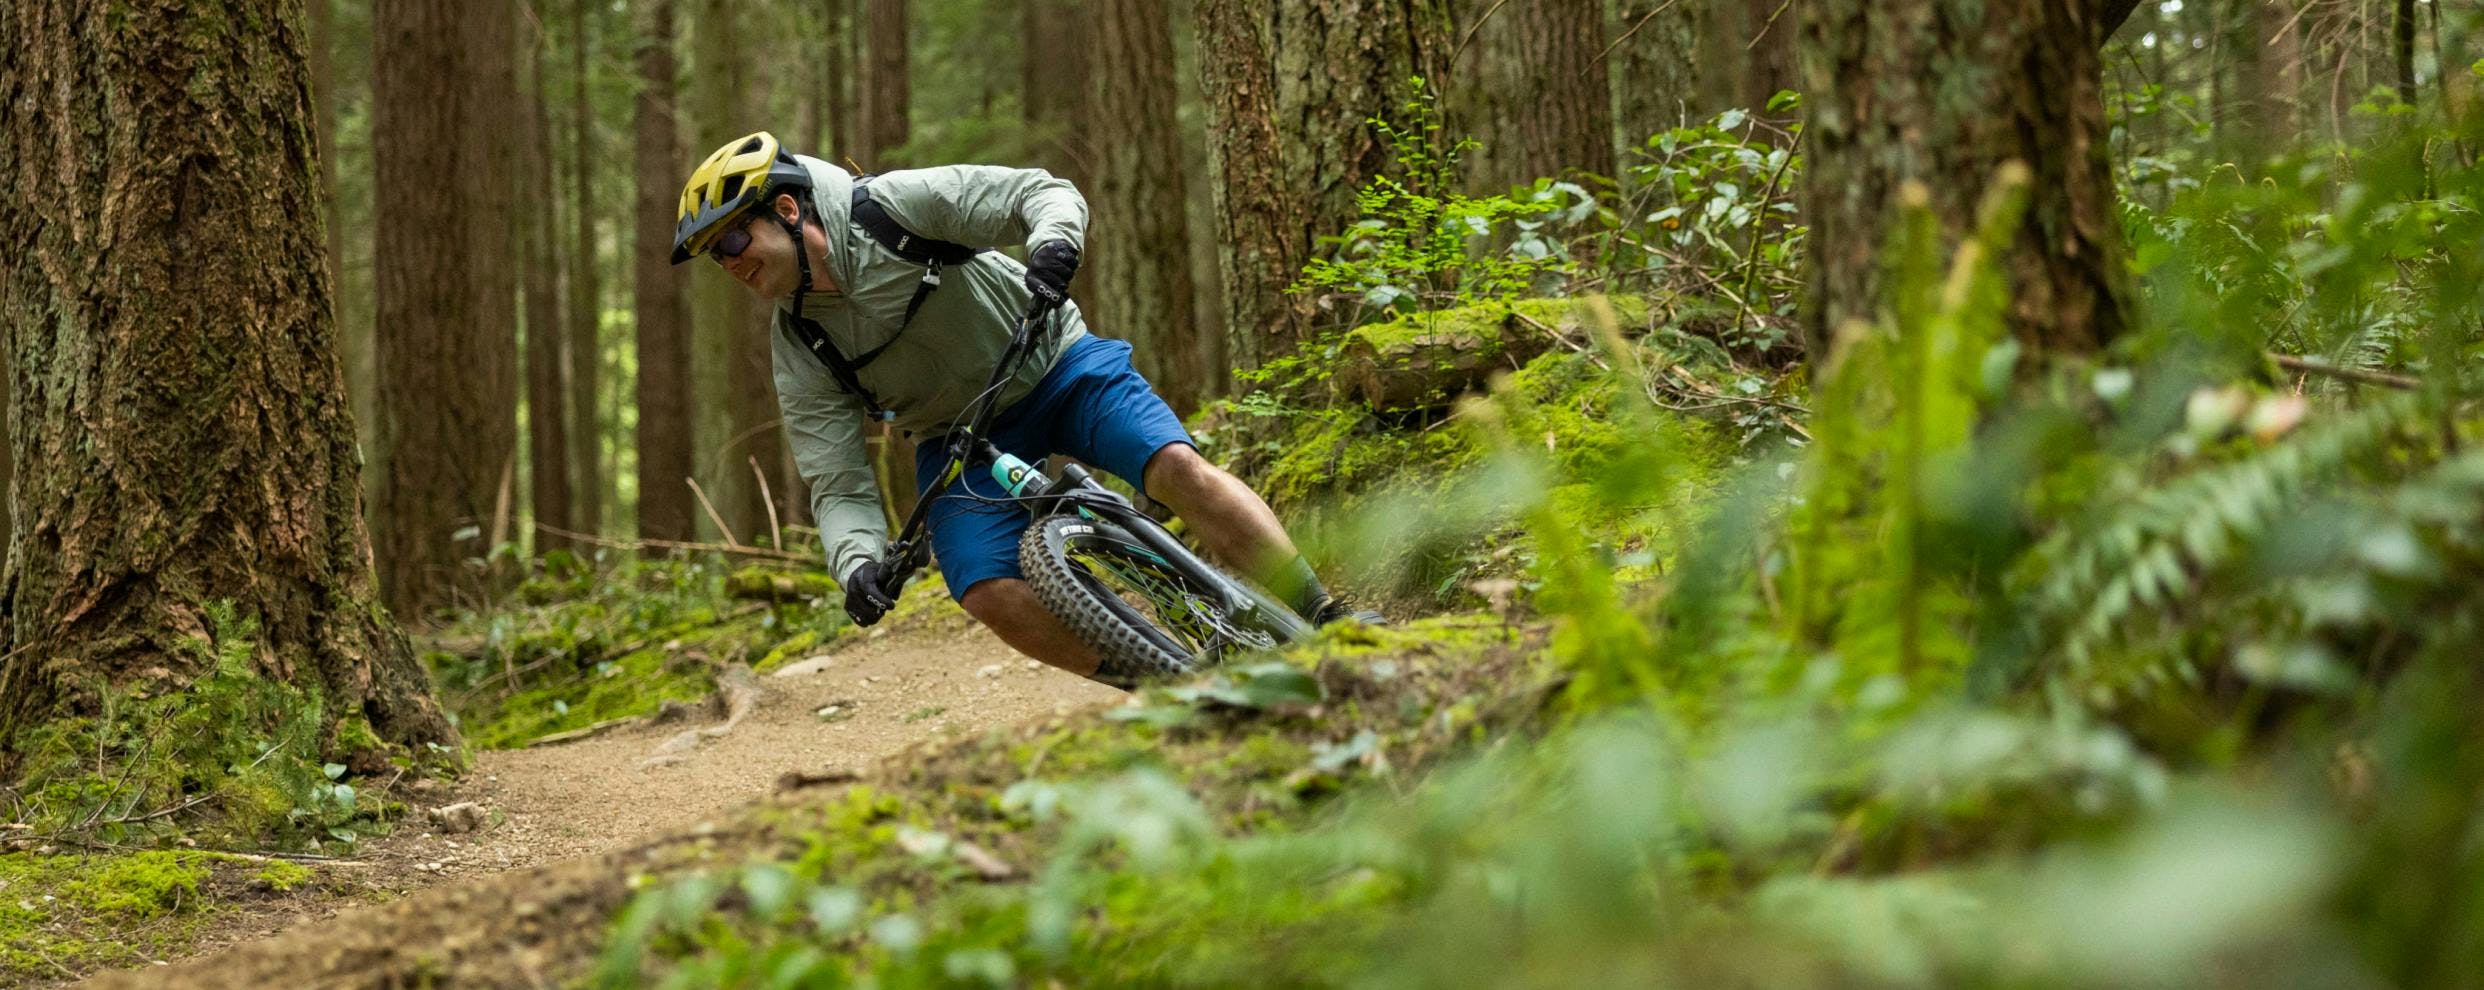 Person on a mountain bike riding on a trail in a forested area